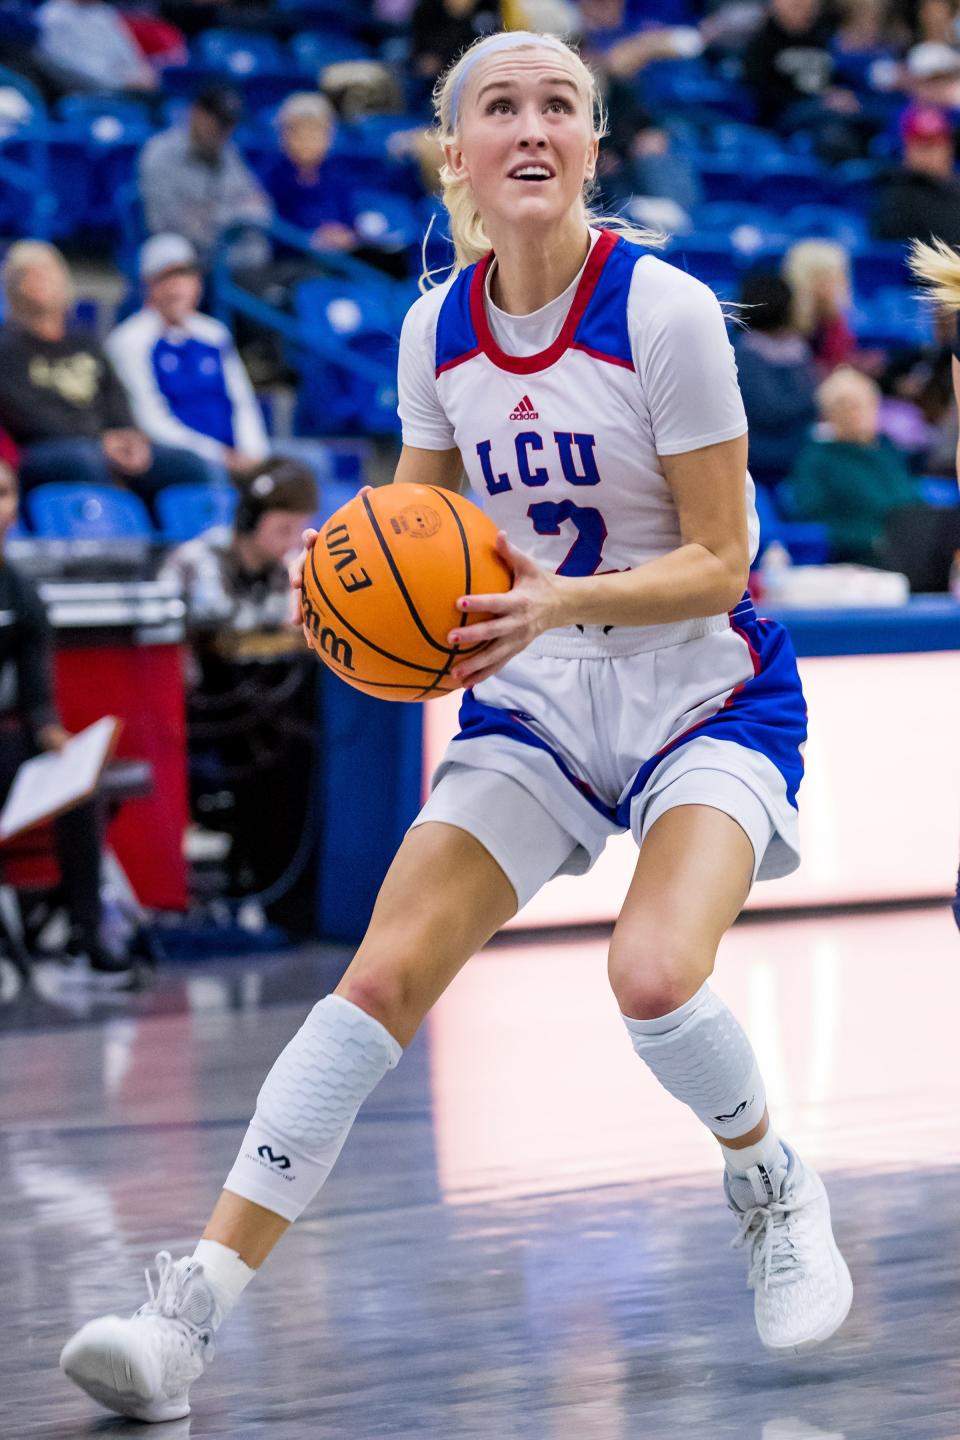 LCU guard Maci Maddox (2) ranks second on the team in scoring at 10.5 points per game and fourth in the Lone Star Conference in assists at 4.3 per game.